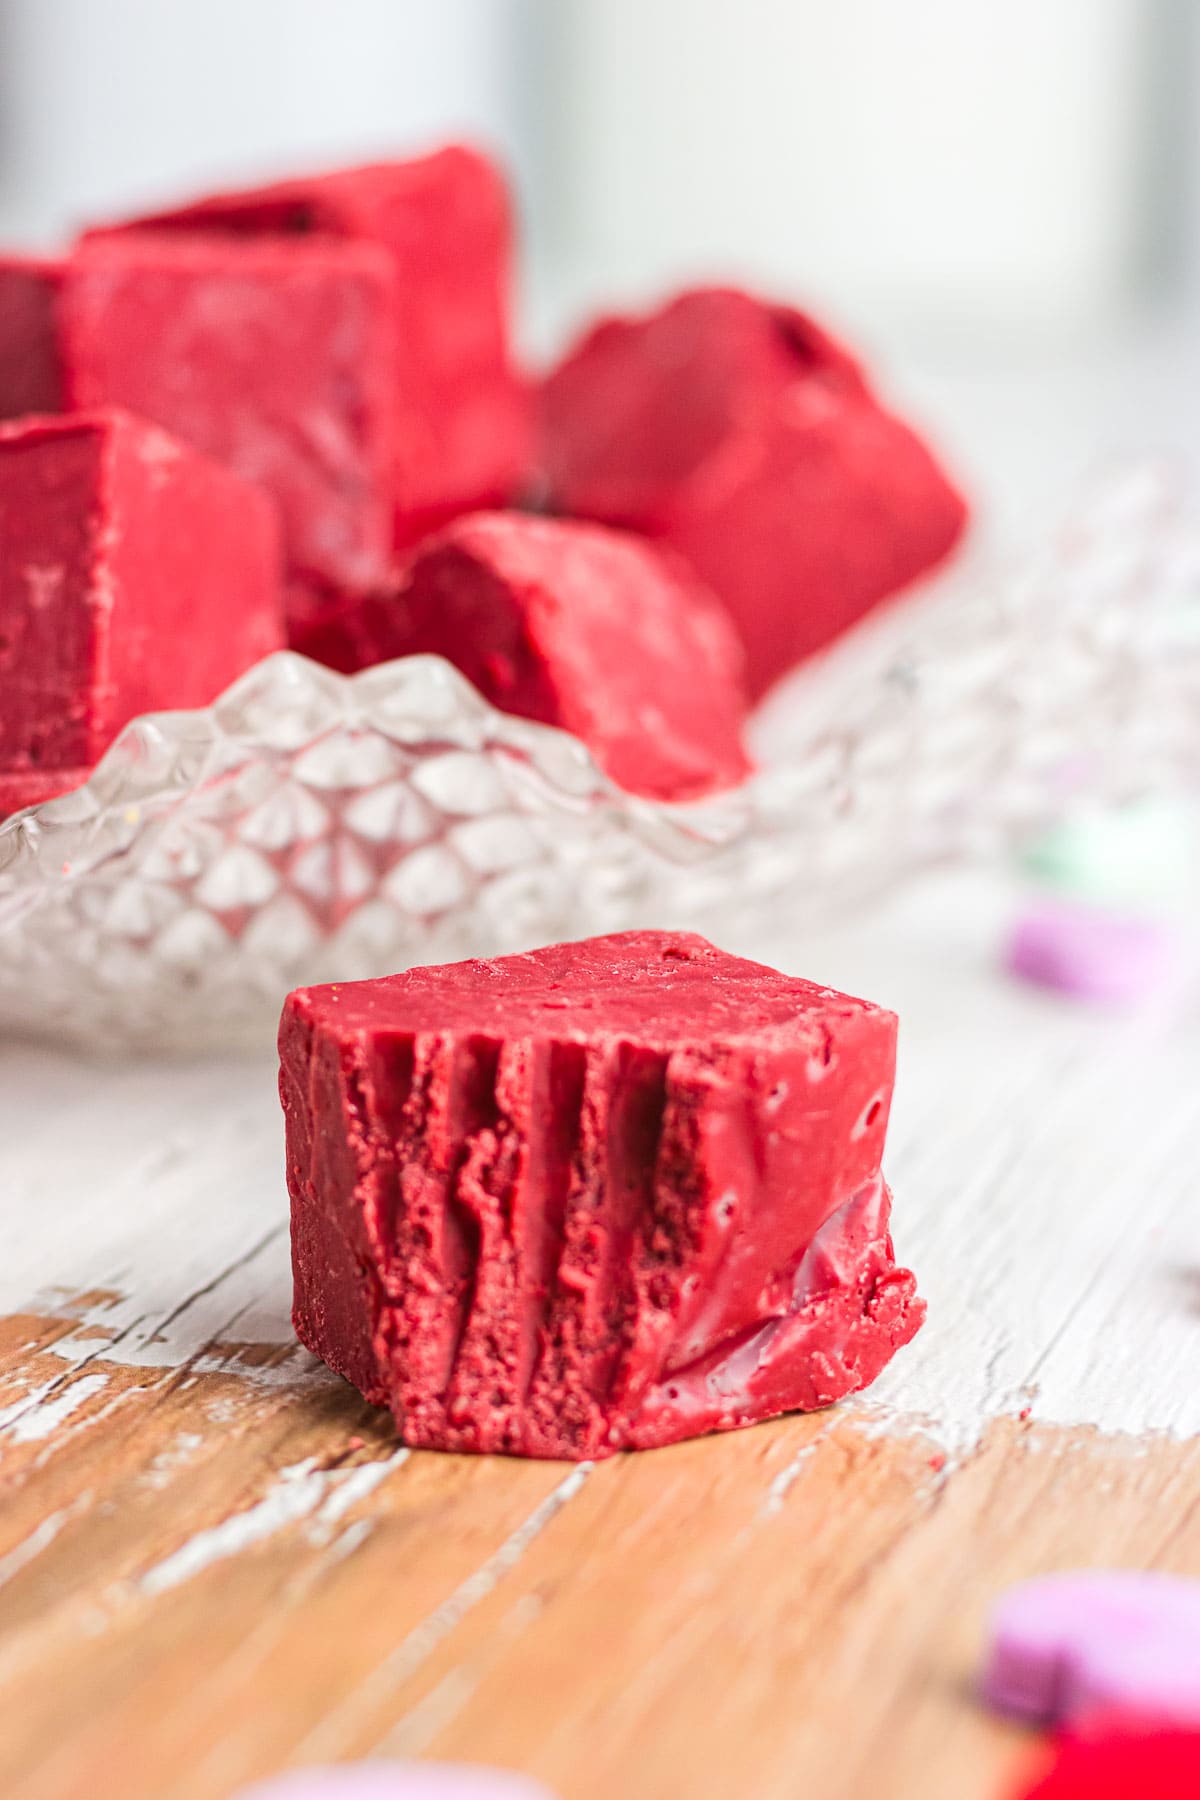 An up-close photo of red velvet fudge with a bite taken out of it.